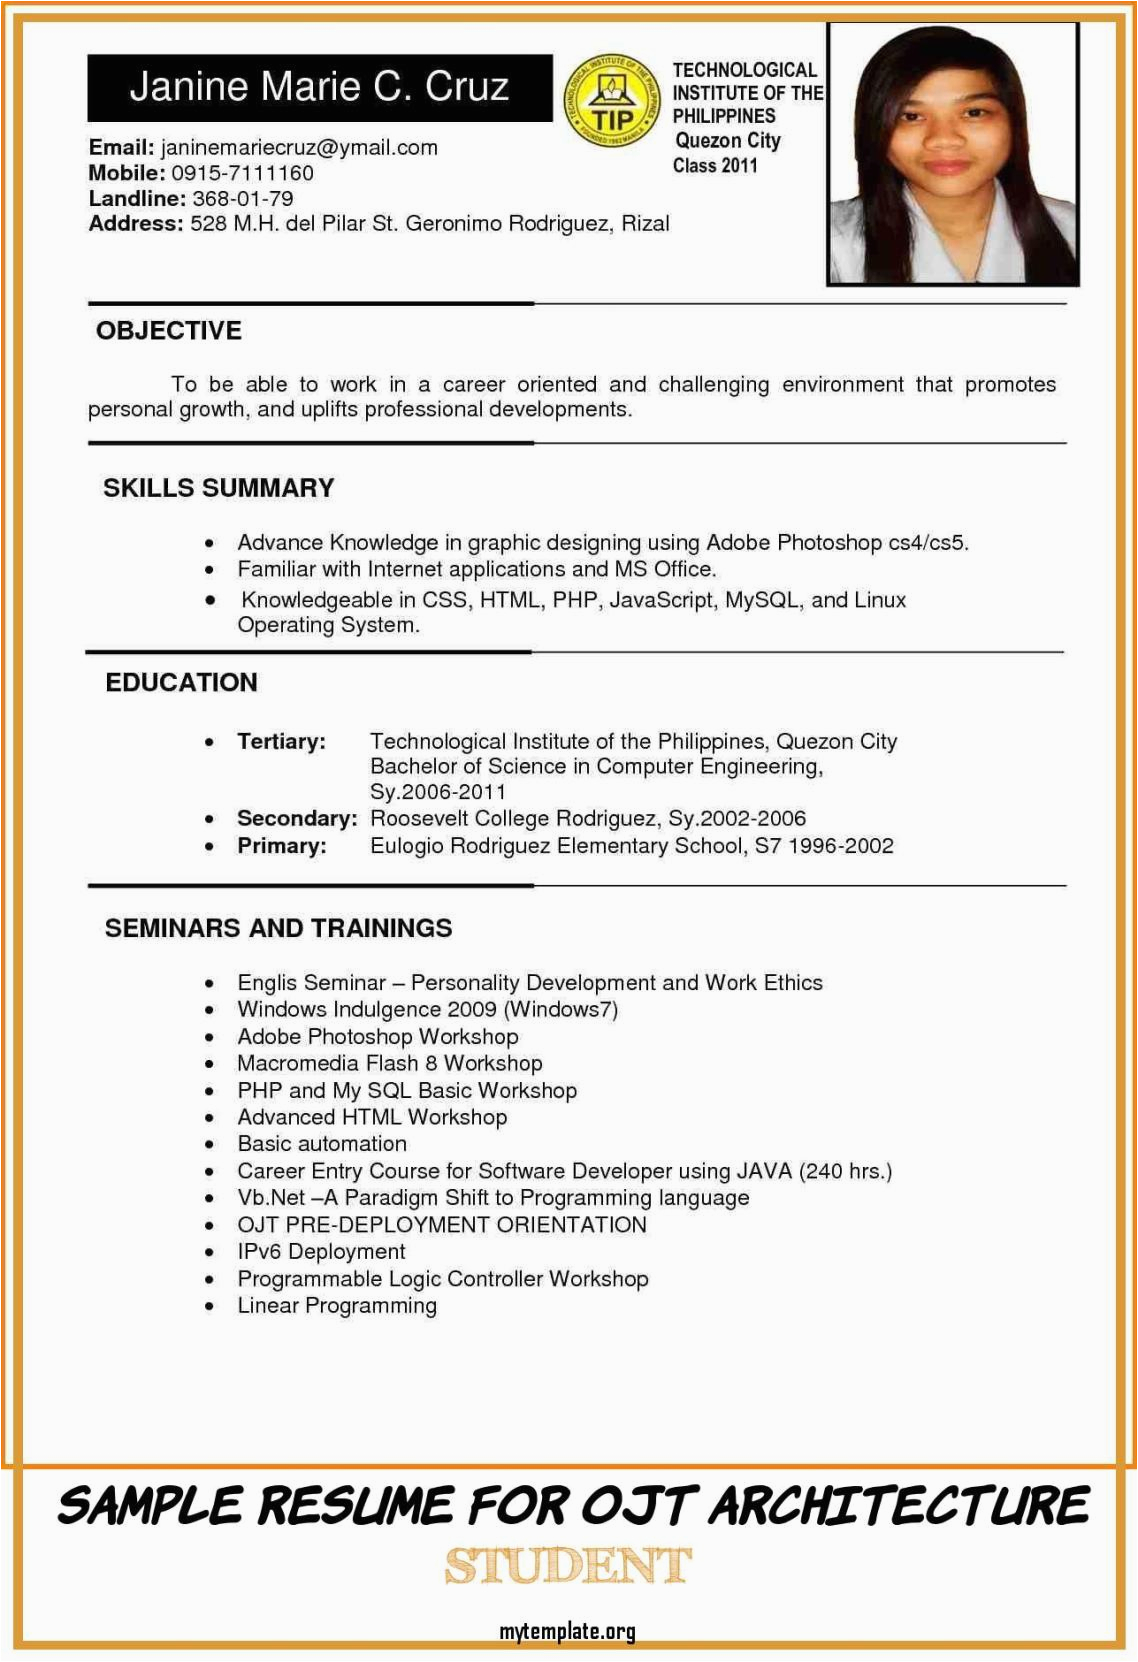 Sample Of Resume for Ojt Engineering Students Sample Resume for Ojt Architecture Student Resume